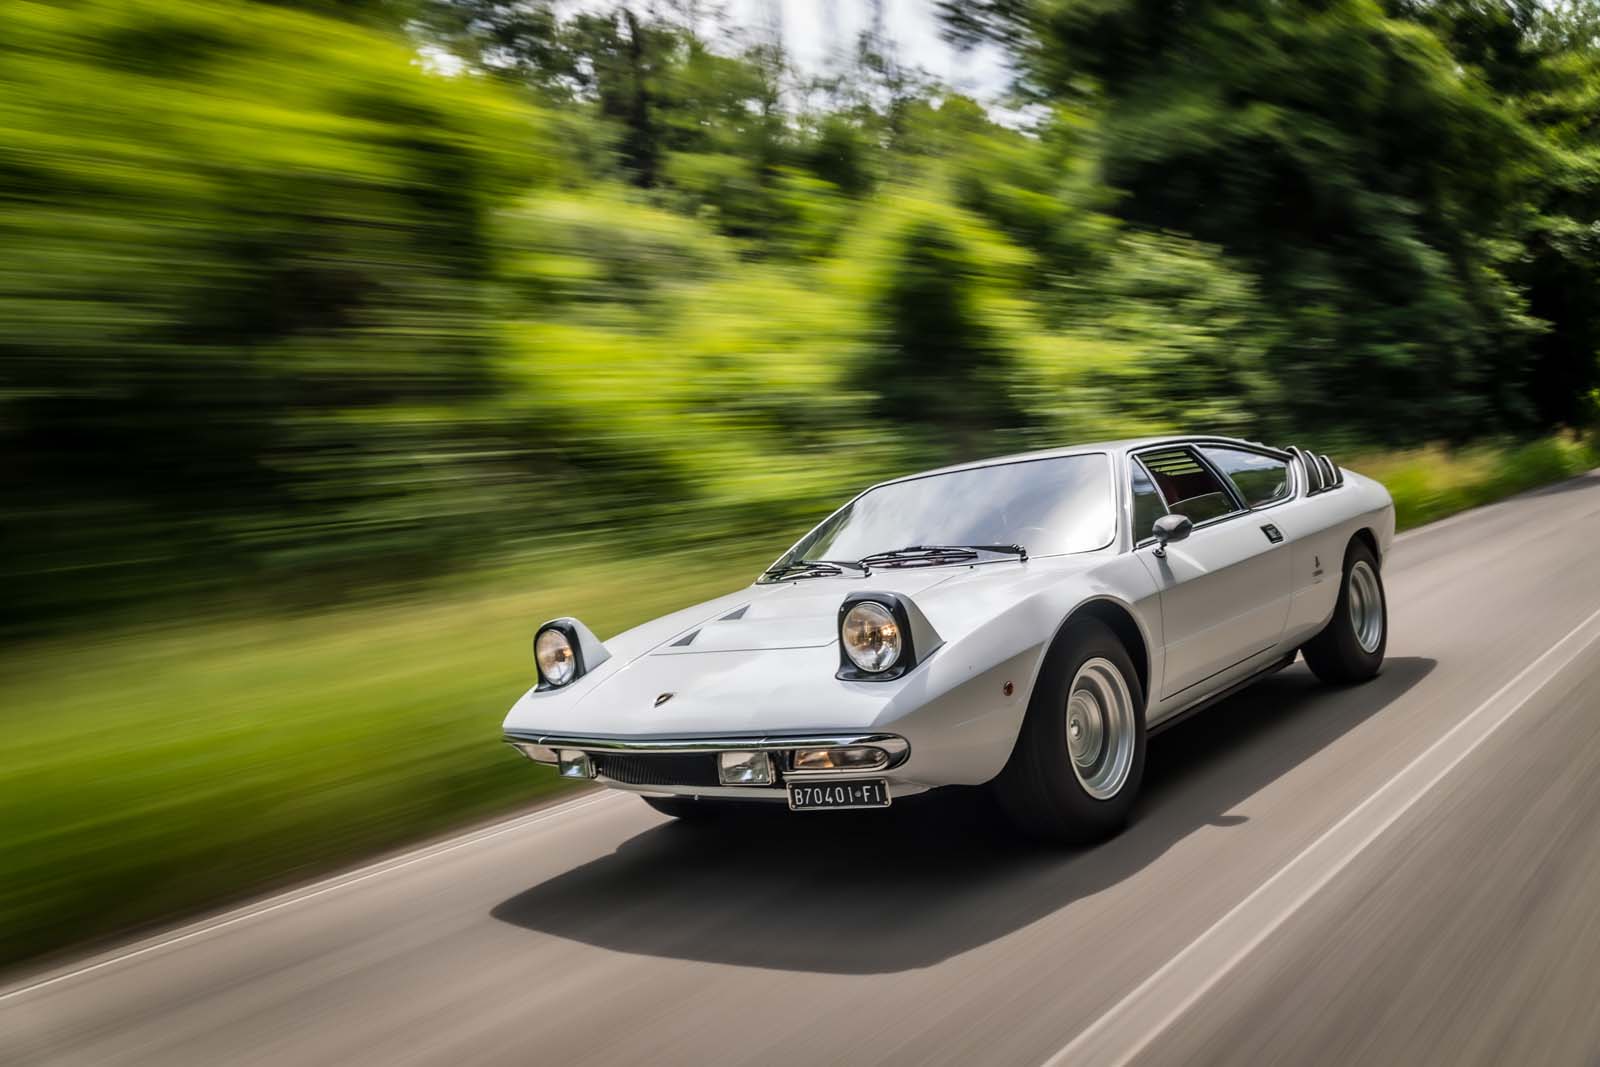 Lamborghini Urraco, A Celebration Of 50 Years Since The Launch Of Their First V8